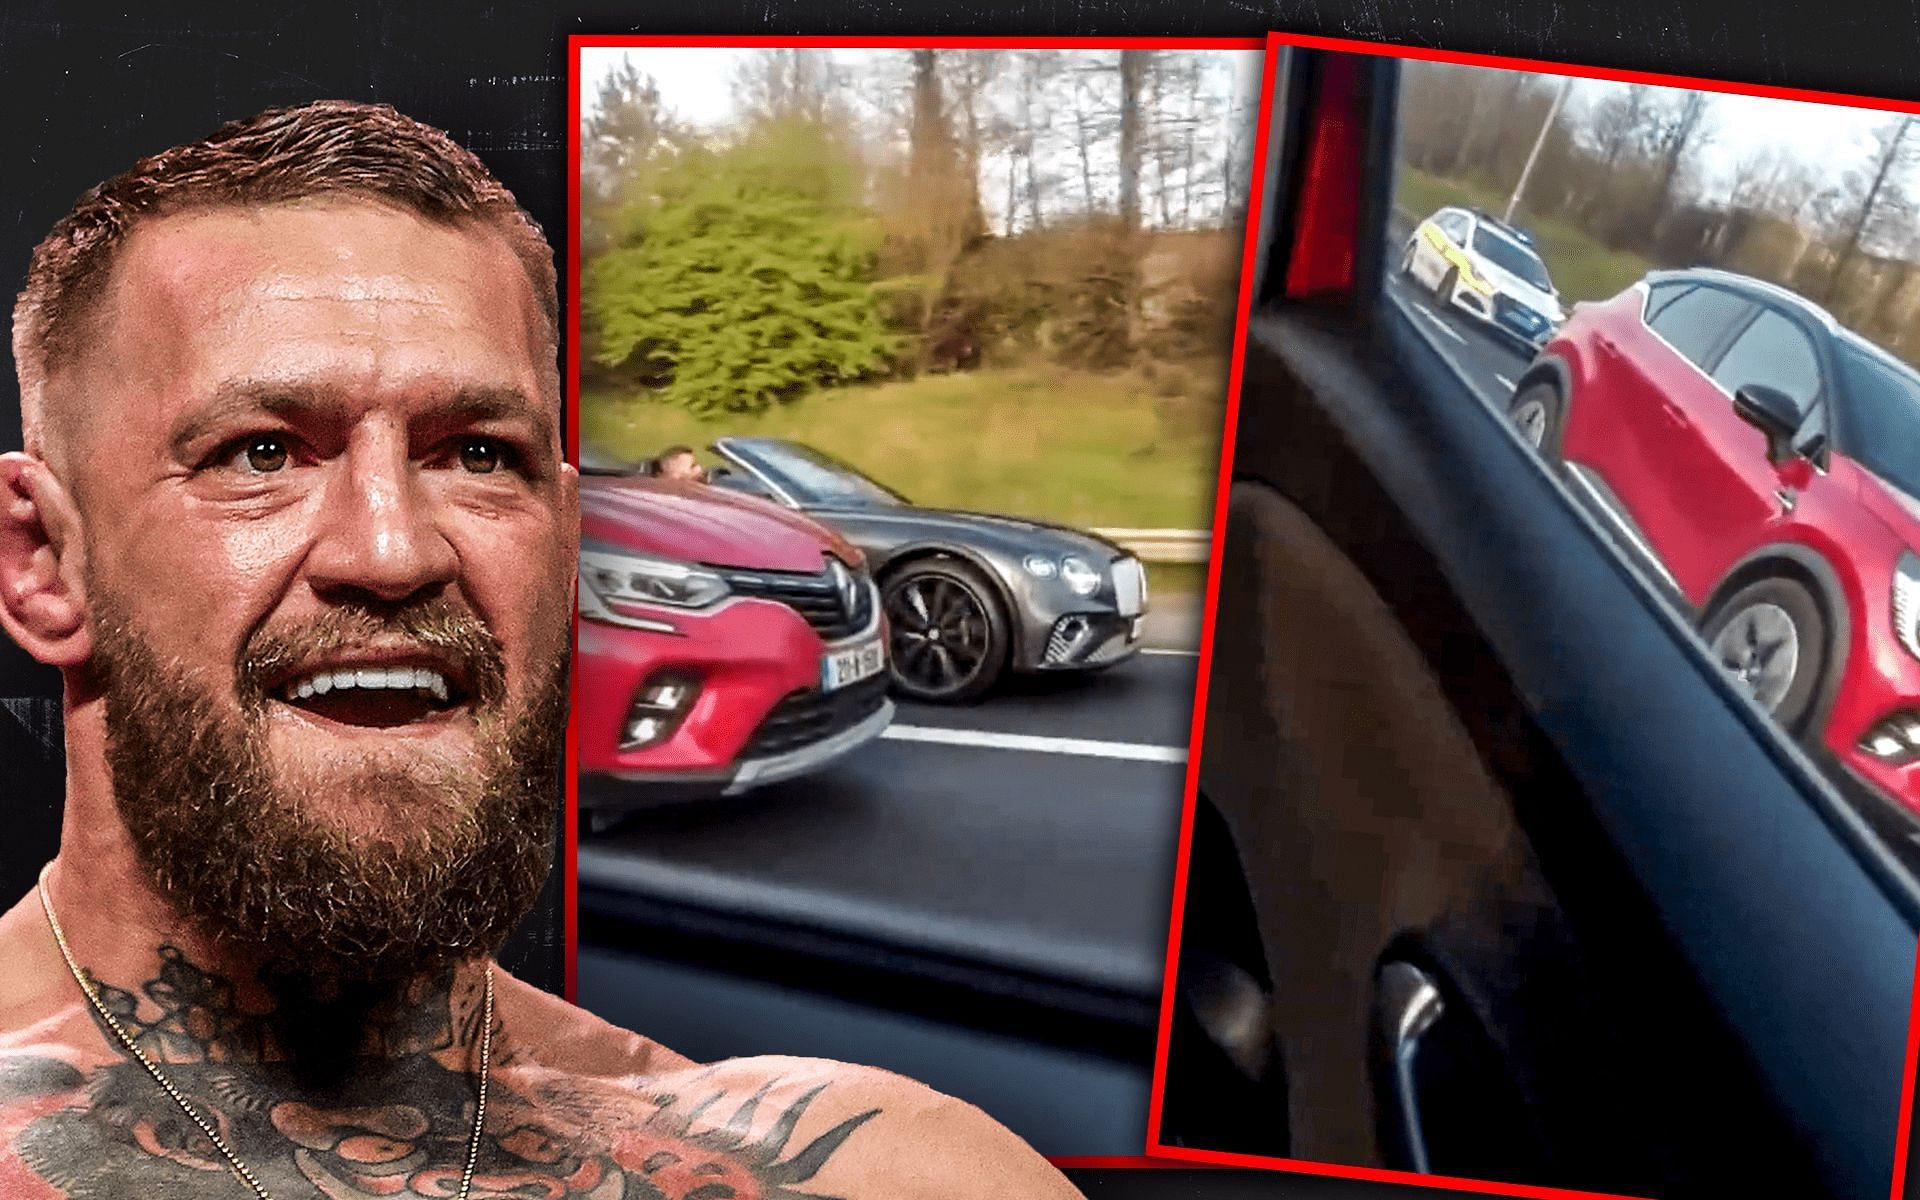 Conor McGregor was recently arrested for dangerous driving [Right image credits - Screenshots taken from @Simbot20 on Twitter]